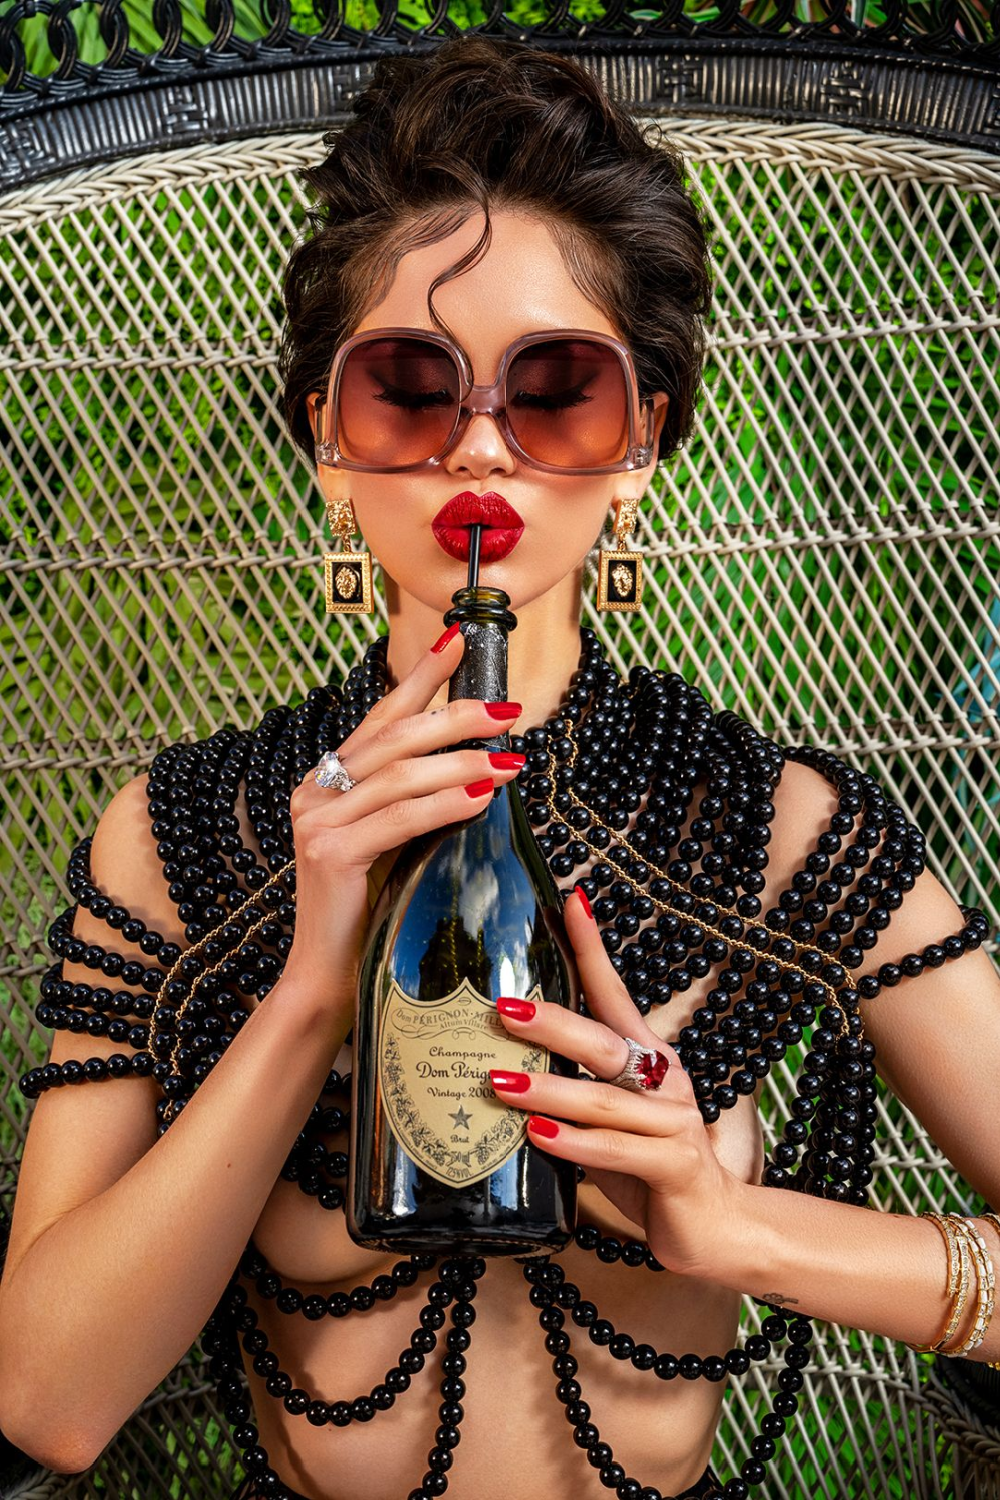 Woman Sipping Champagne Photographic Art | Andrew Martin Always Dom Per | Oroatrade.com